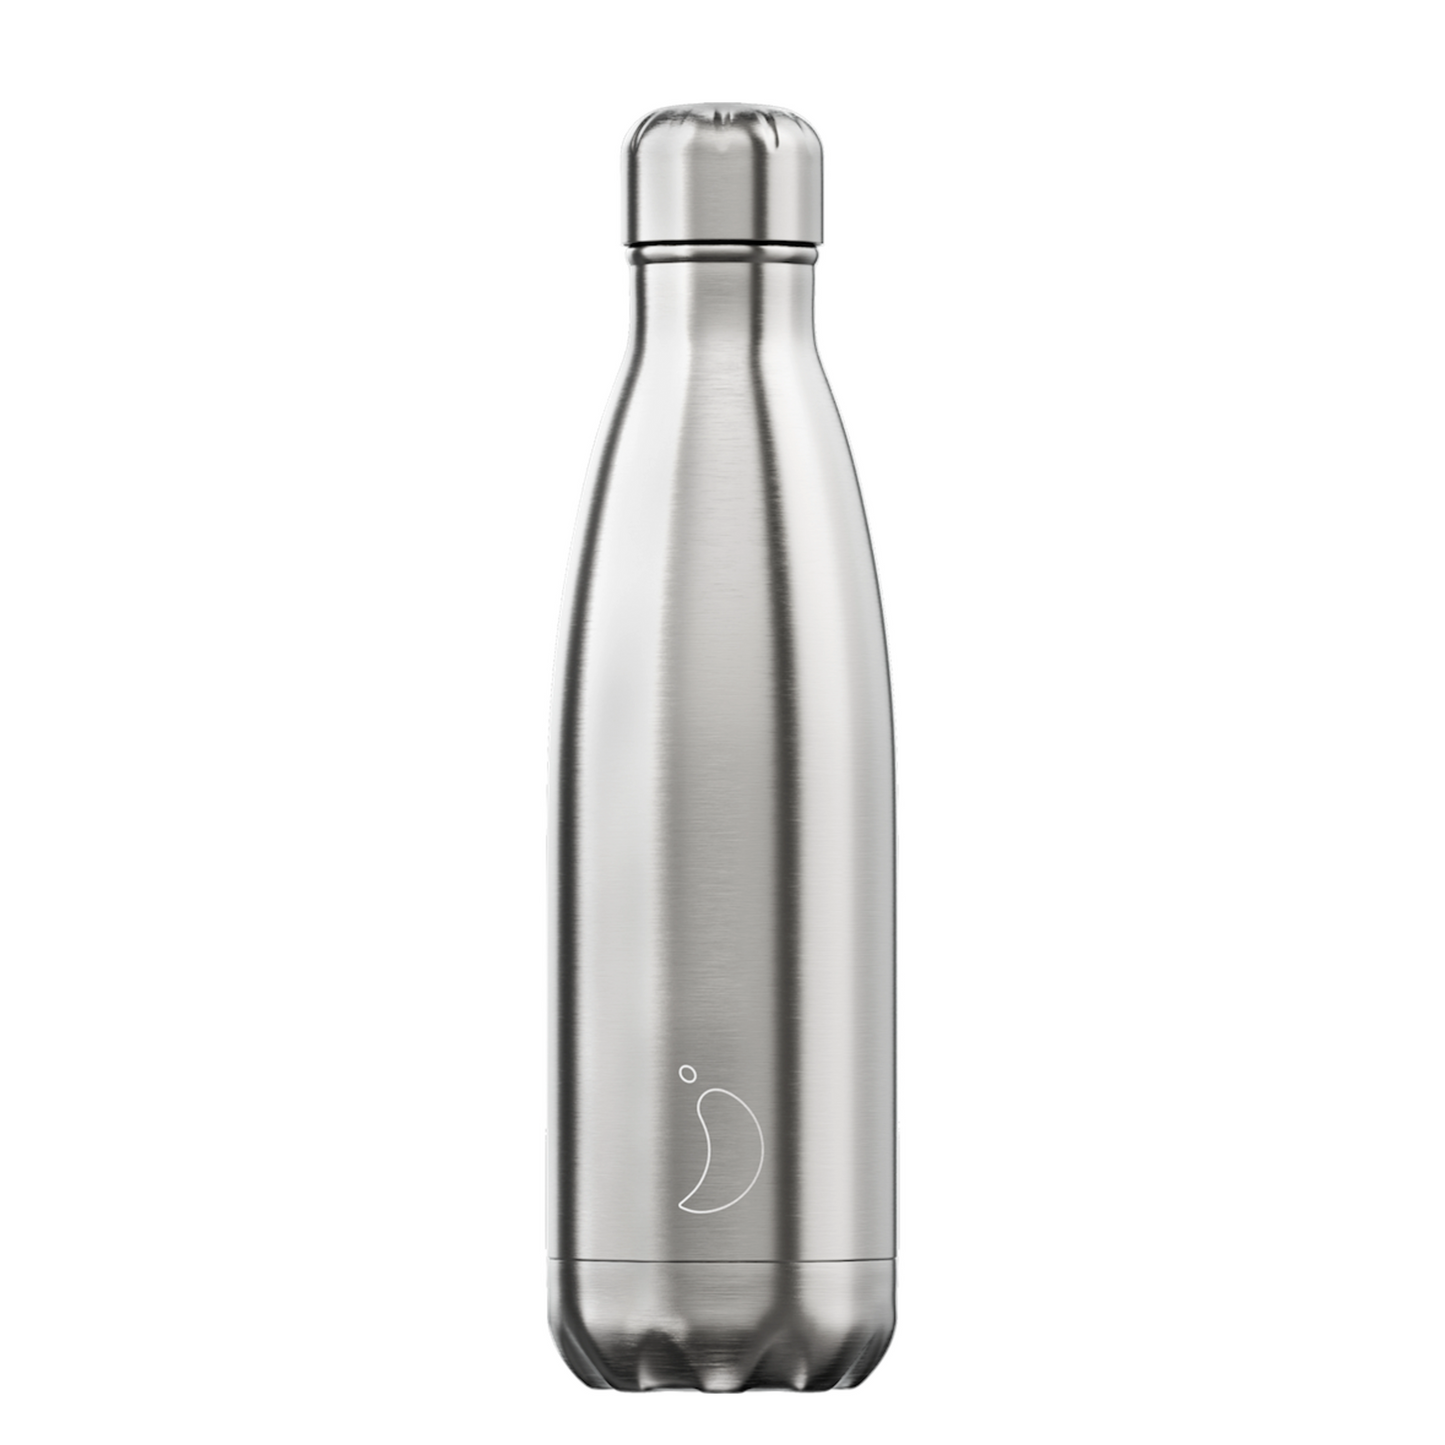 Stainless steel, 500ml